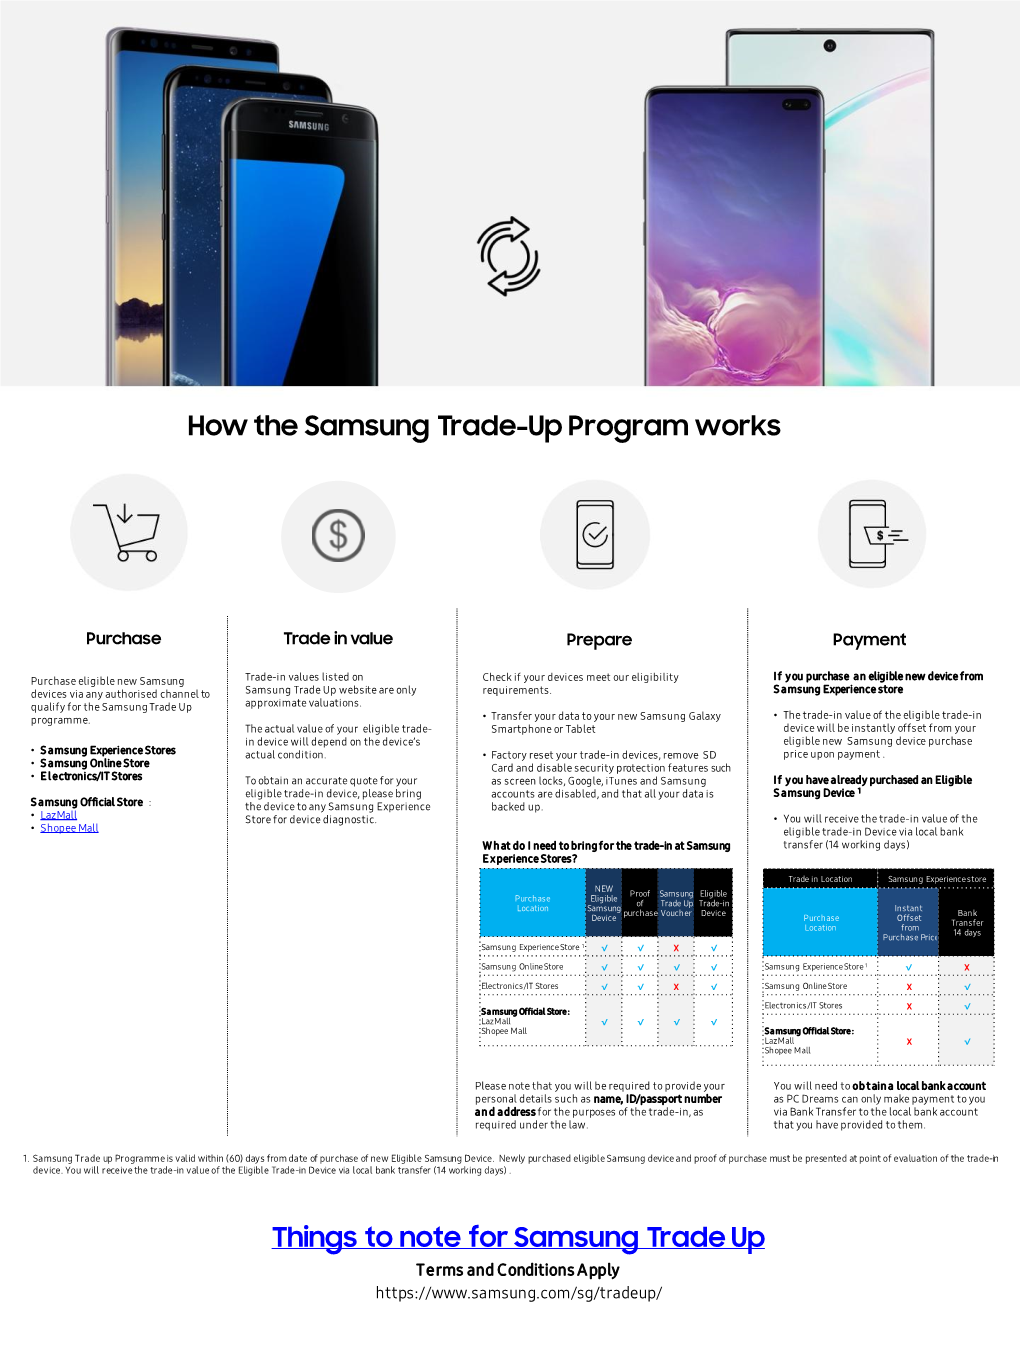 How the Samsung Trade-Up Program Works Things to Note for Samsung